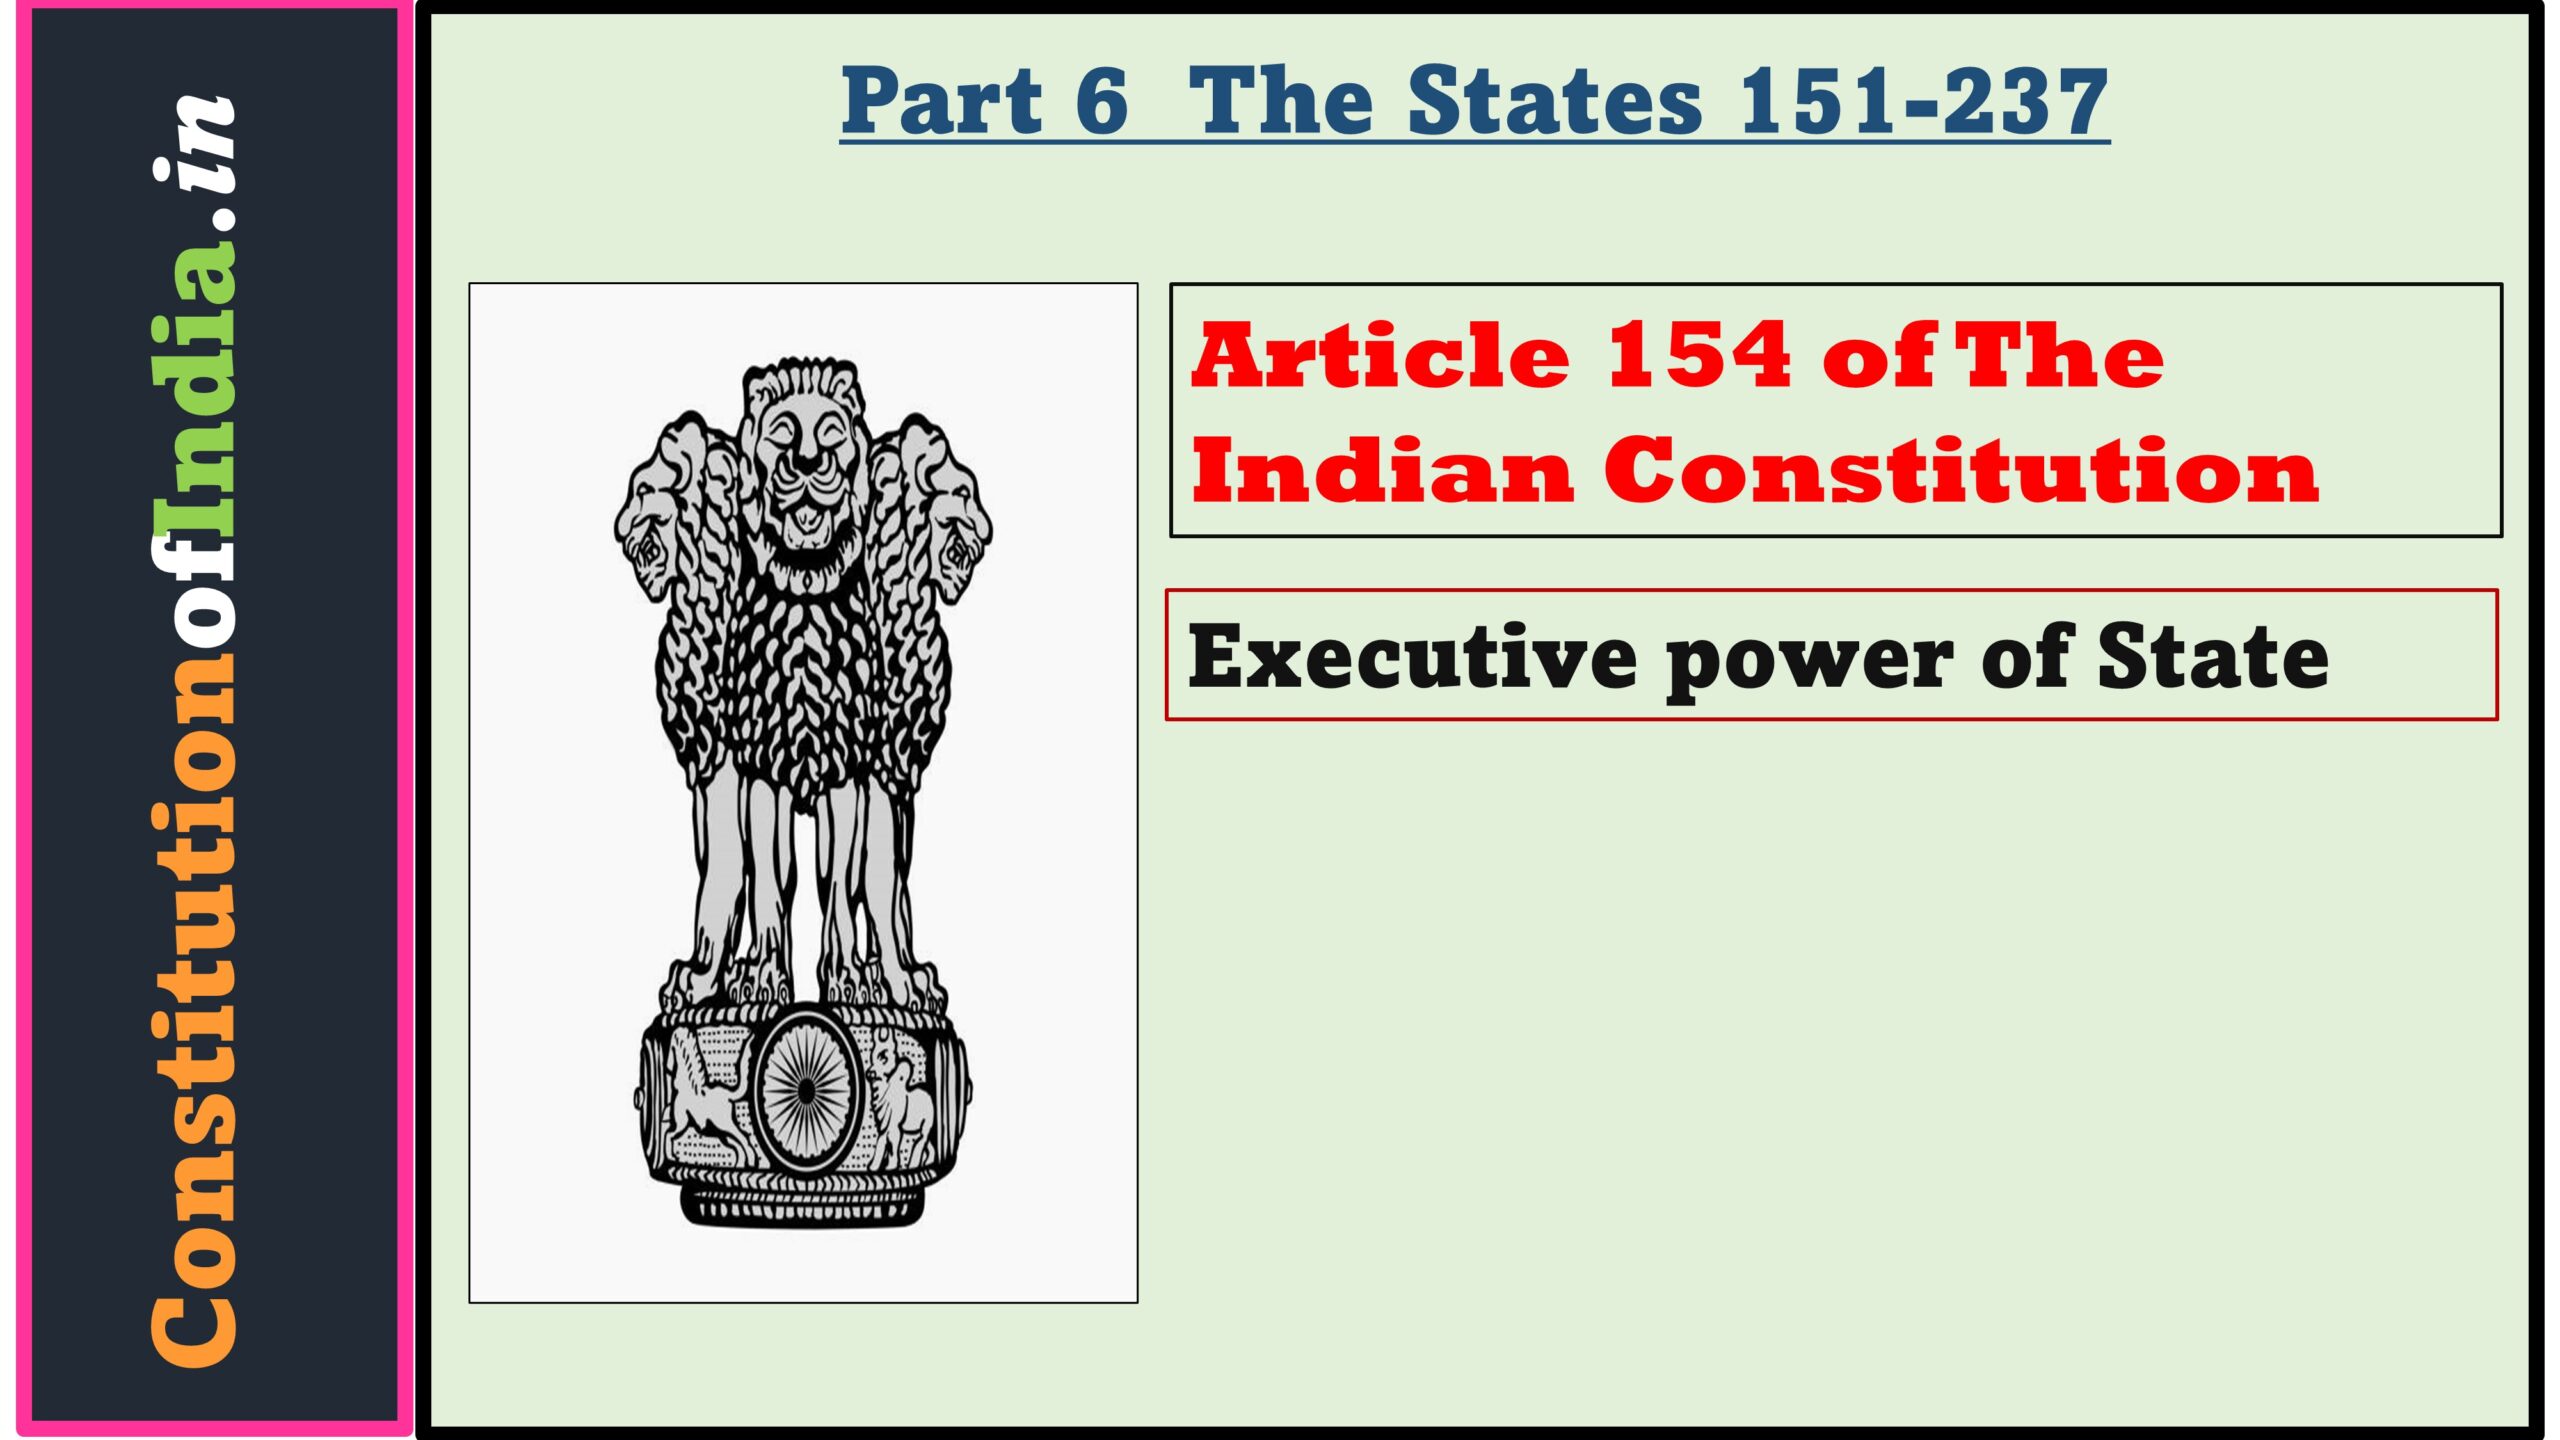 Article 154 of The Indian Constitution